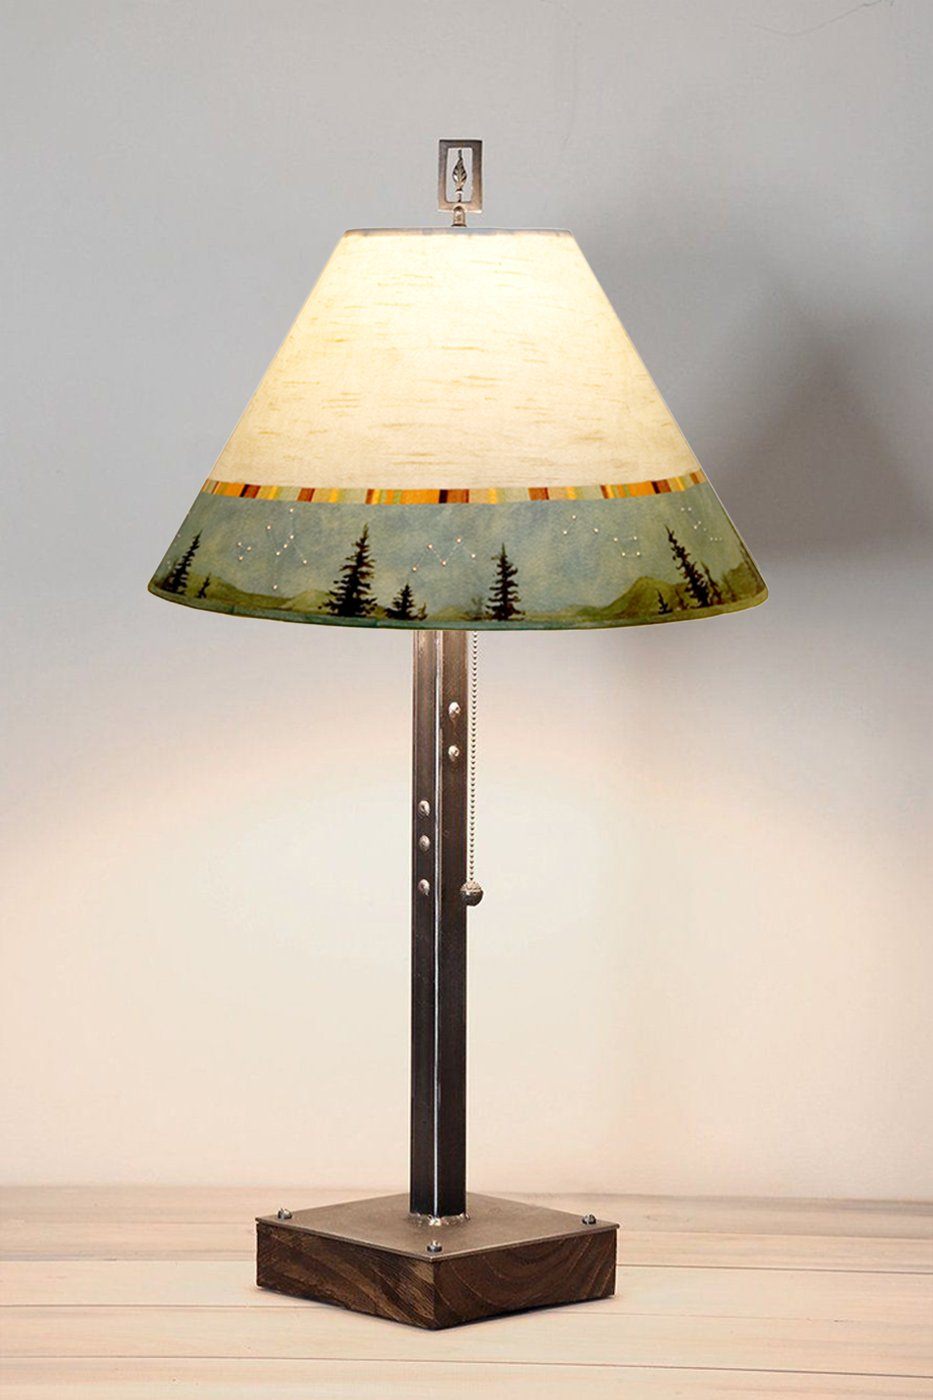 Janna Ugone & Co Table Lamps Steel Table Lamp on Wood with Medium Conical Shade in Birch Midnight